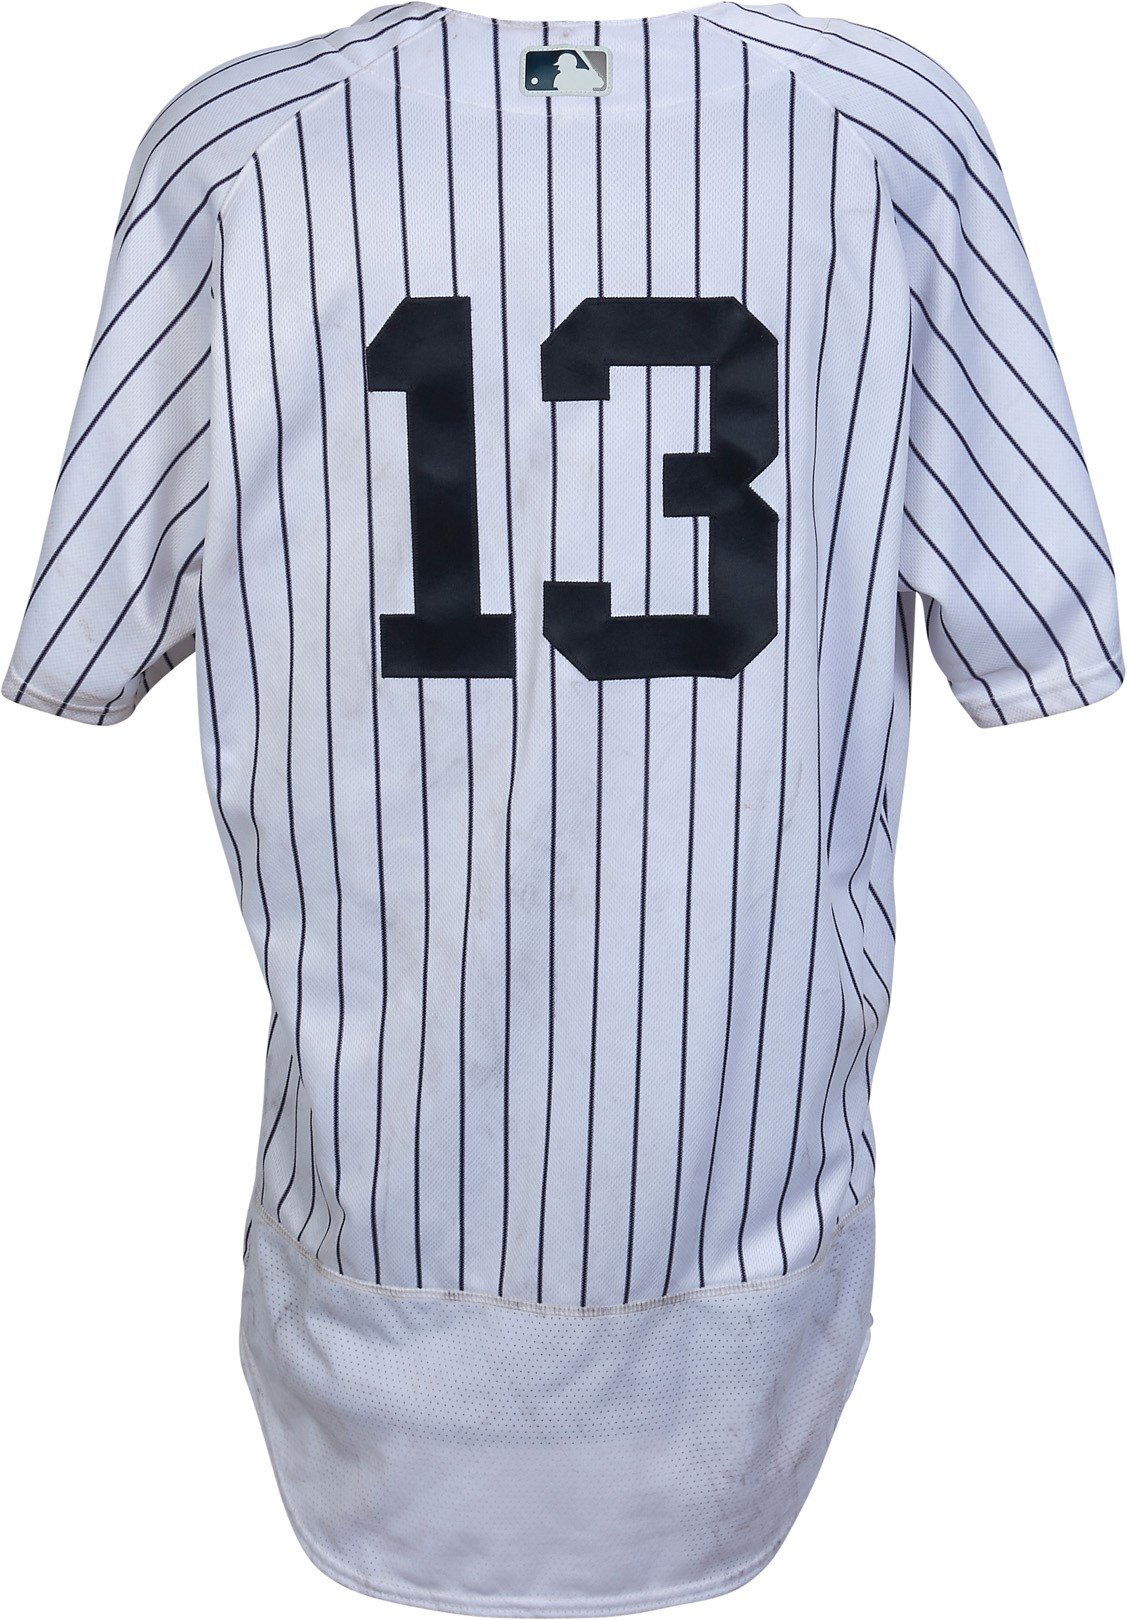 2016 Opening Day Alex Rodriguez Game Worn Yankees Jersey - Final Season (Steiner LOA & Photo-Matched)